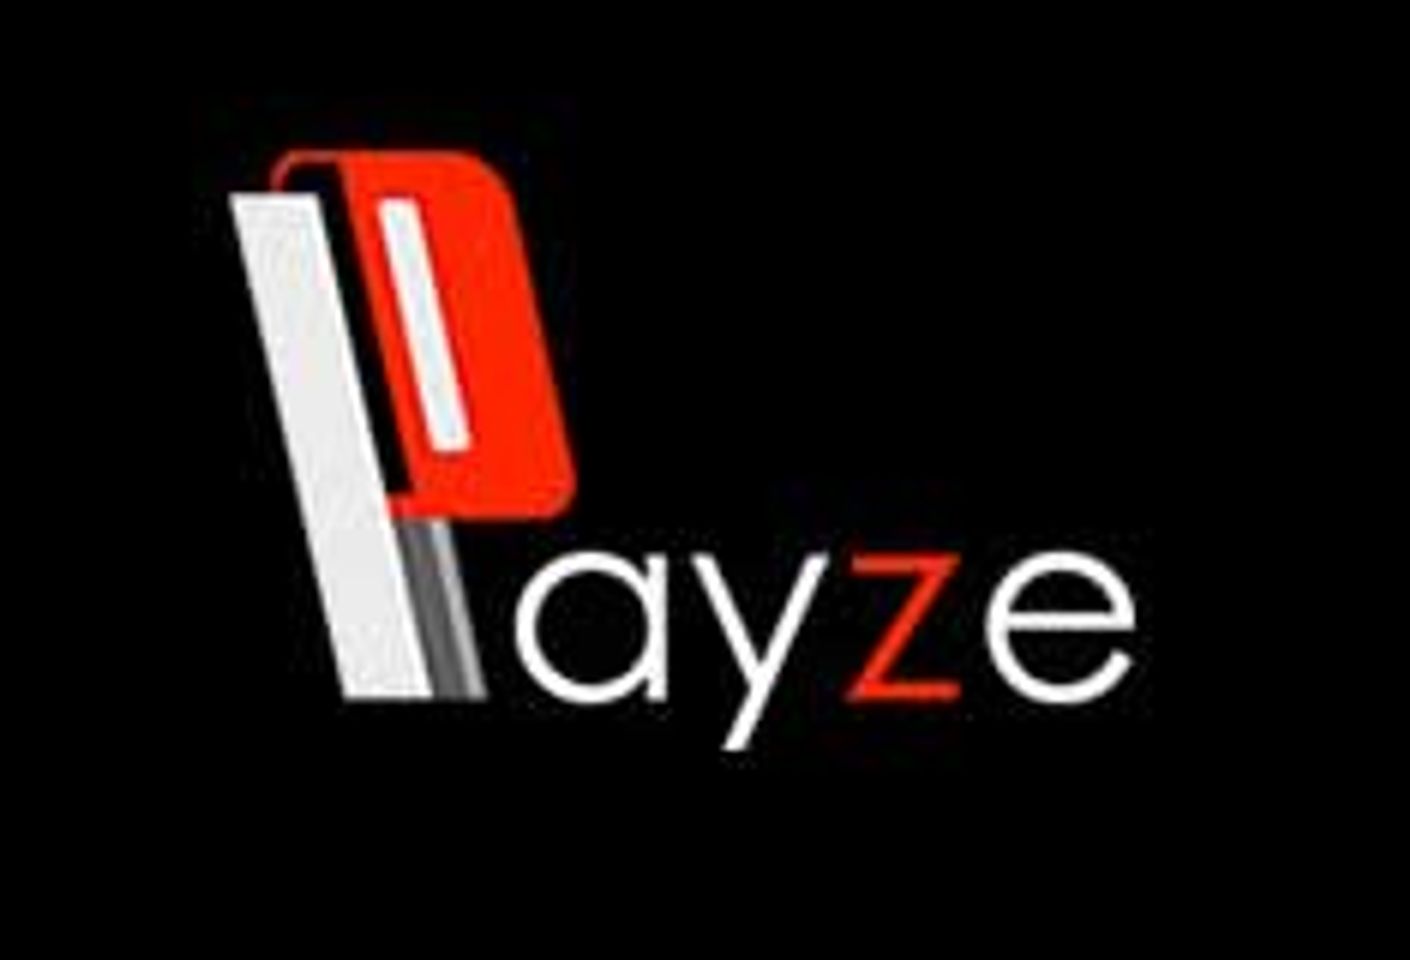 Payze Implements Loyalty Discount Feature